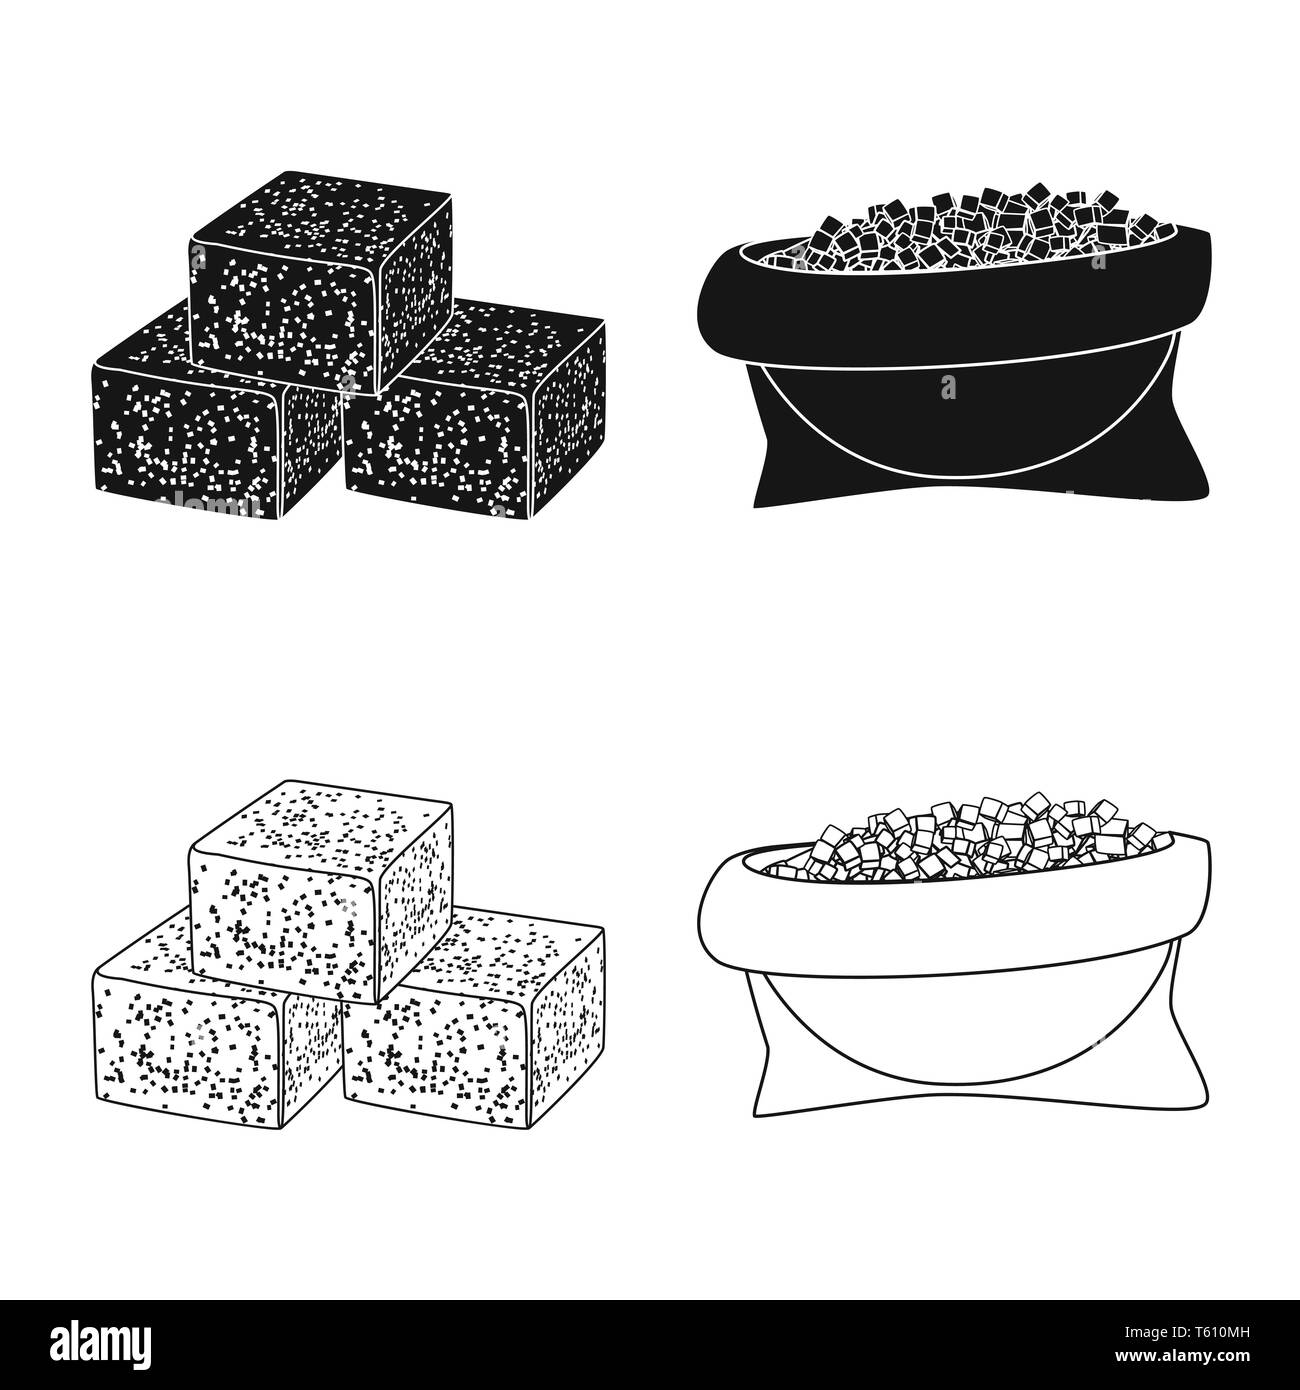 cube,piece,food,granulated,ingredient,brown,diabetes,jaggery,white,plastic,carbohydrate,sack,squares,powder,sweetness,capacity,dessert,cooking,farm,agriculture,sucrose,technology,sugarcane,cane,sugar,field,plant,plantation,set,vector,icon,illustration,isolated,collection,design,element,graphic,sign, Vector Vectors , Stock Vector